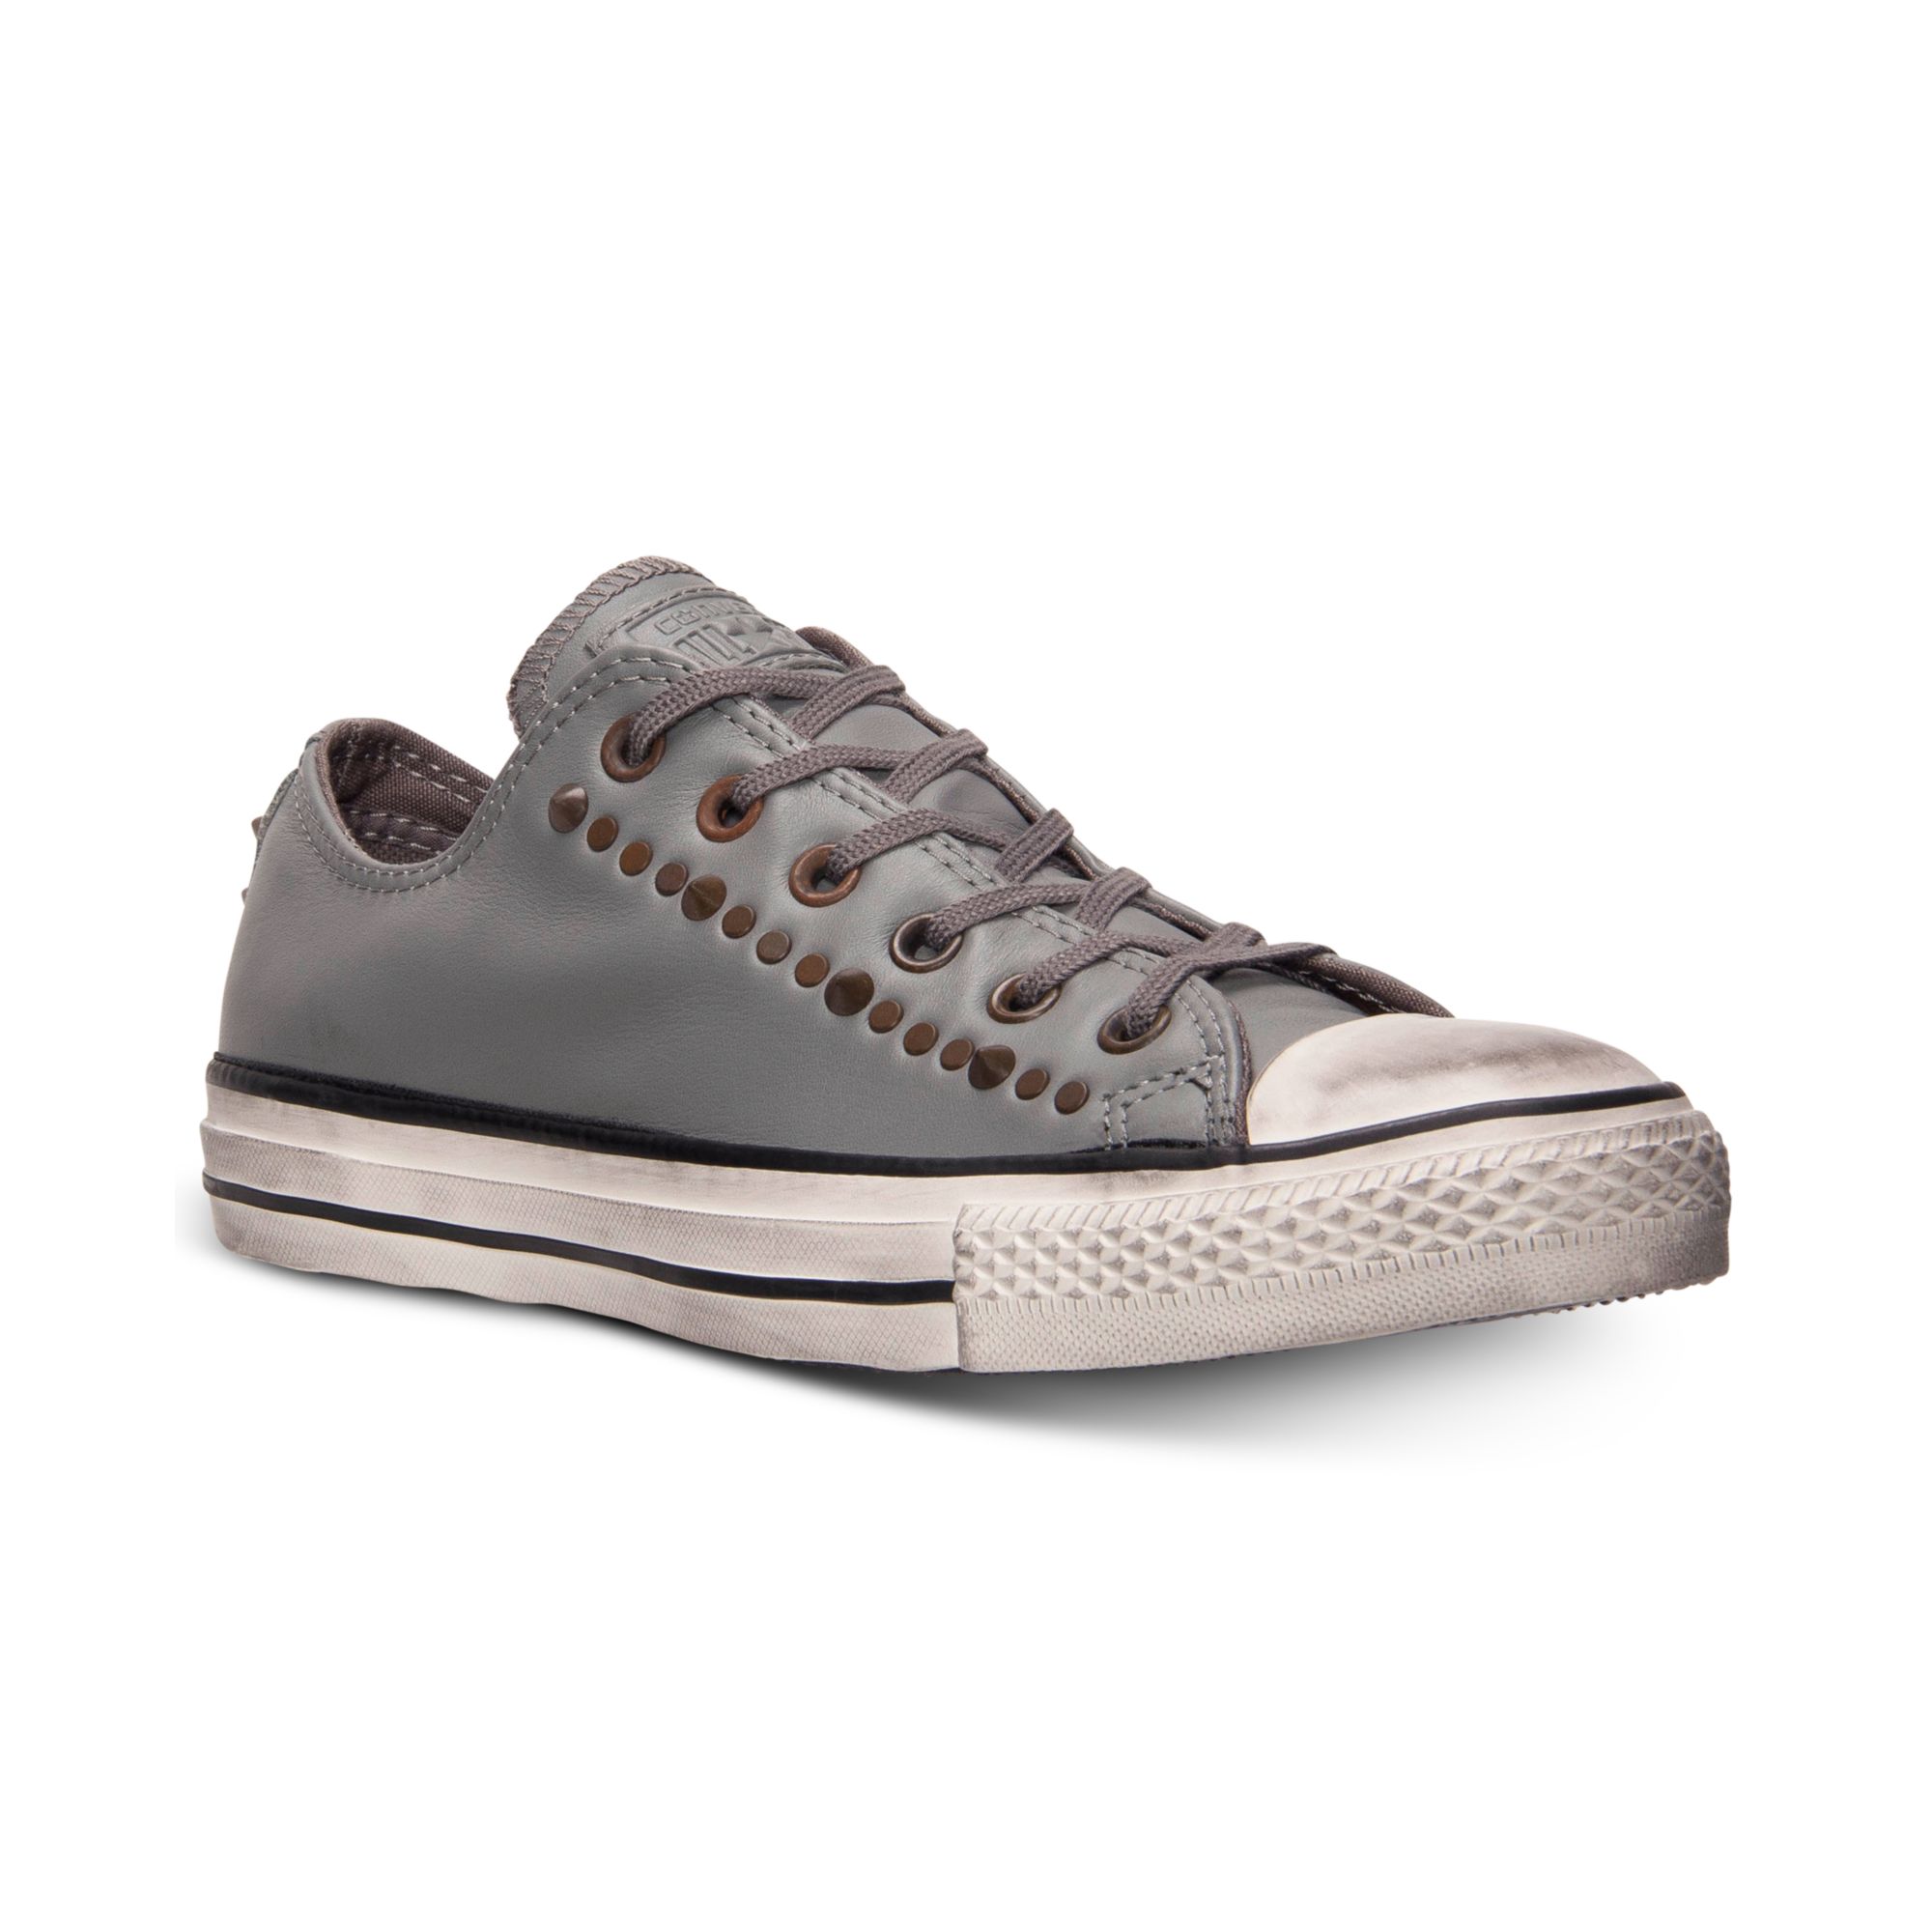 Converse Men's Chuck Taylor All Star Studded Casual Sneakers from ...